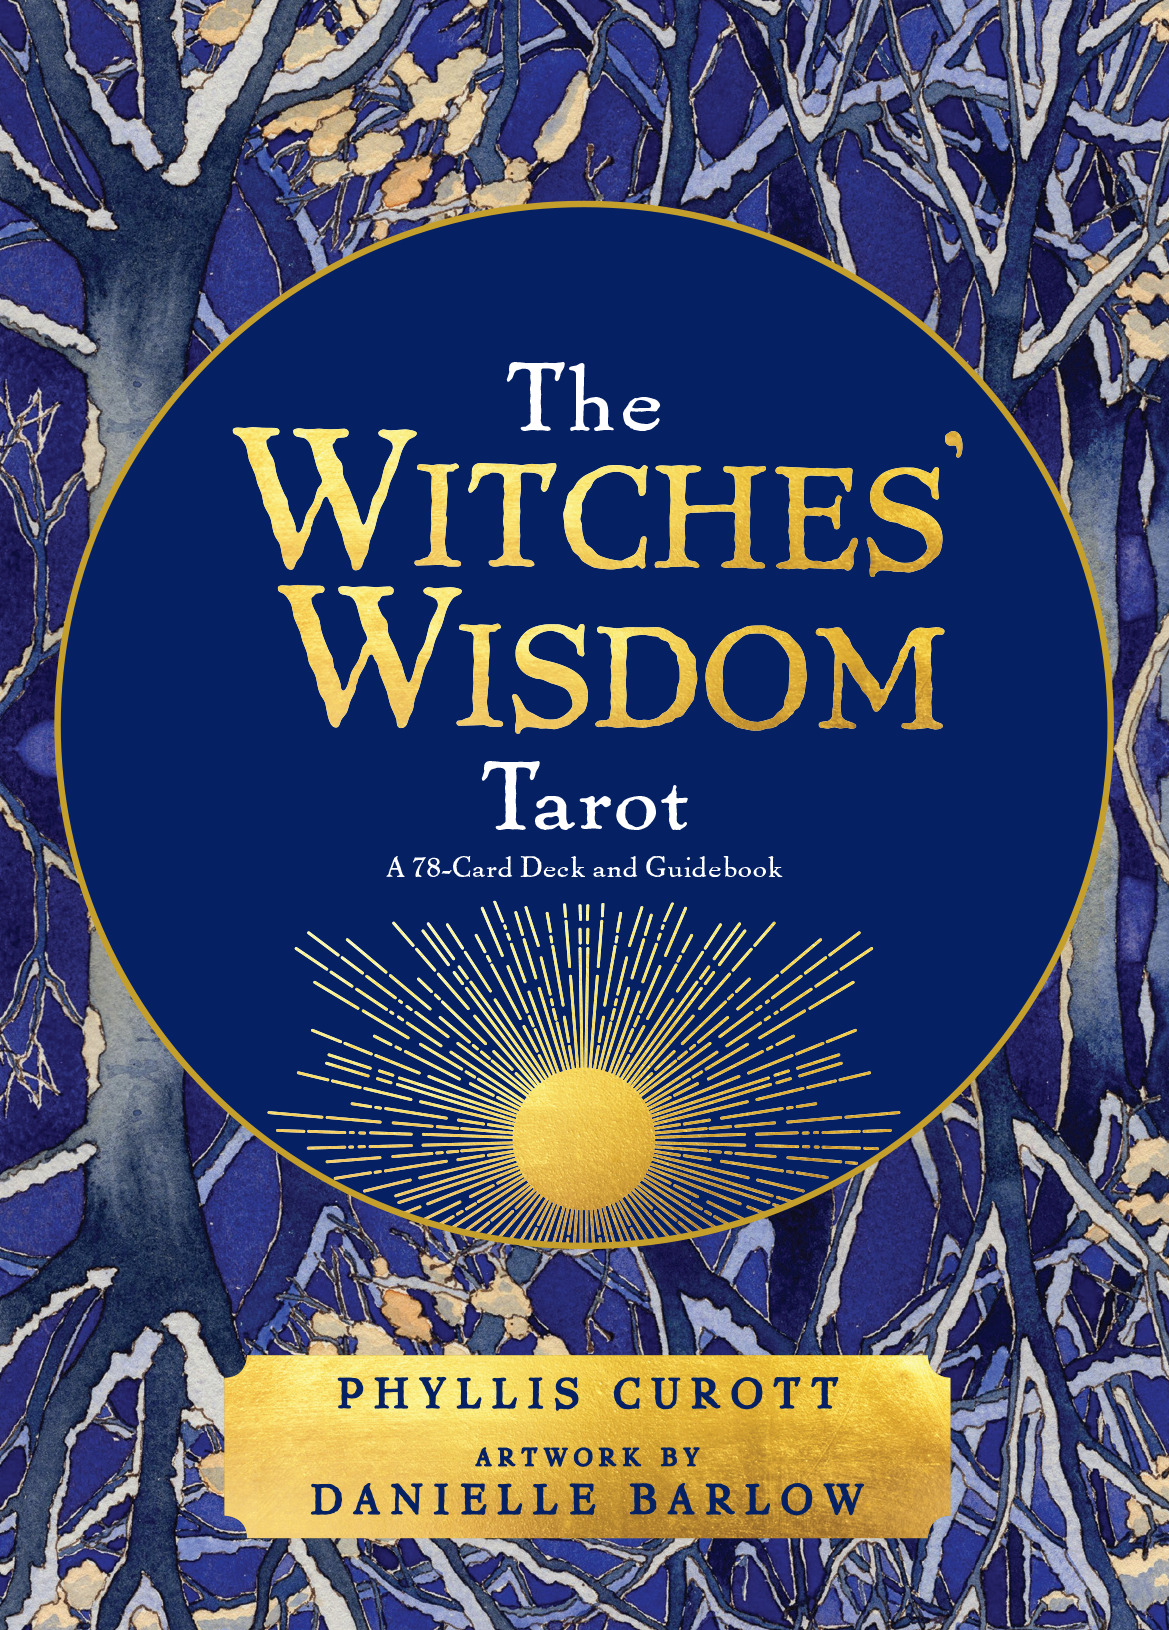 The Witches' Wisdom Tarot (Standard Edition) : A 78-Card Deck and Guidebook | Curott, Phyllis (Auteur) | Barlow, Danielle (Illustrateur)